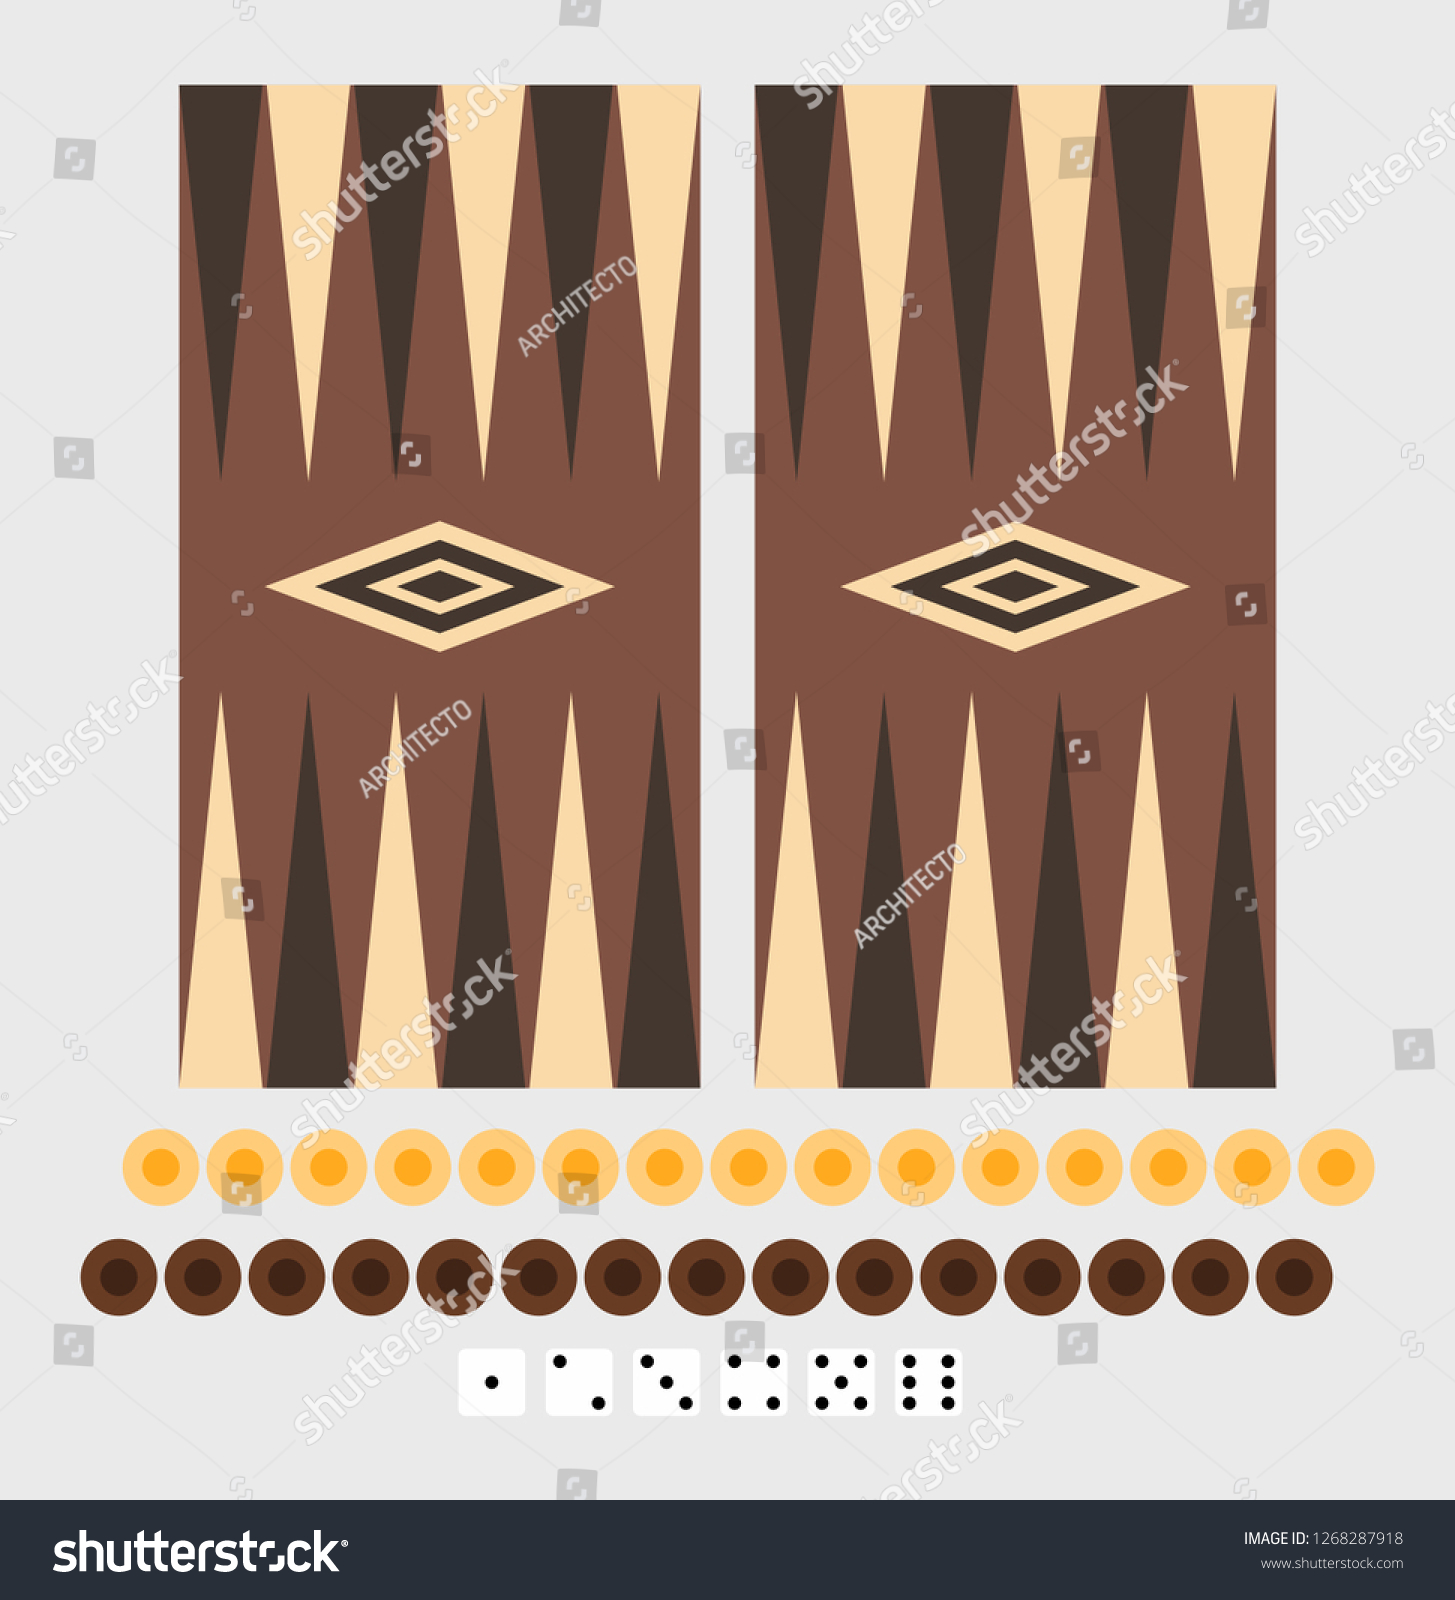 SVG of backgammon game board set, two sets of 15 checkers and dice numbers set. Vector for your design or logo svg